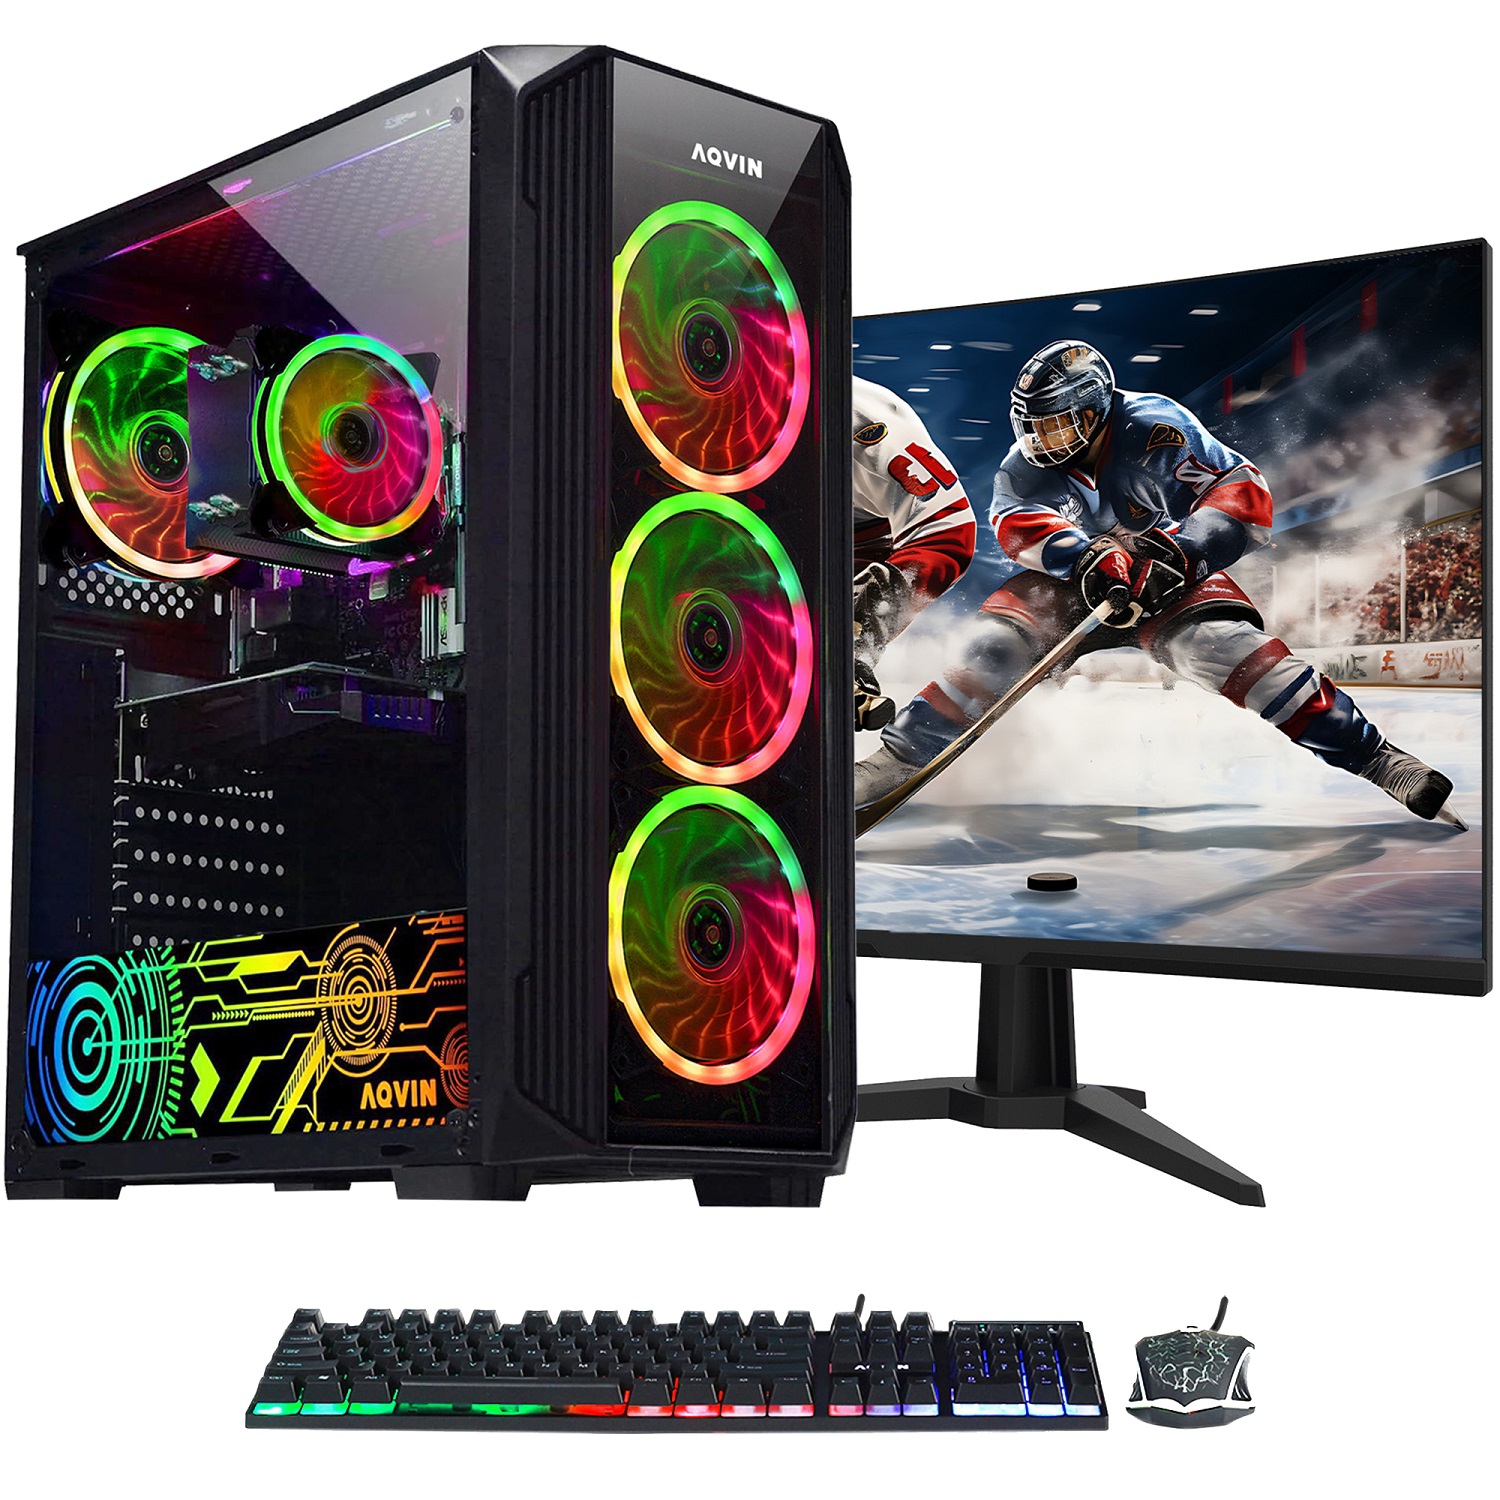 Refurbished (Excellent) AQVIN Gaming PC Desktop Computer Tower (Intel i7 / 1TB SSD - 32GB RAM / RX550 4GB / Windows 10 Pro) New 27-inch Curved Gaming Monitor - Only at Best Buy